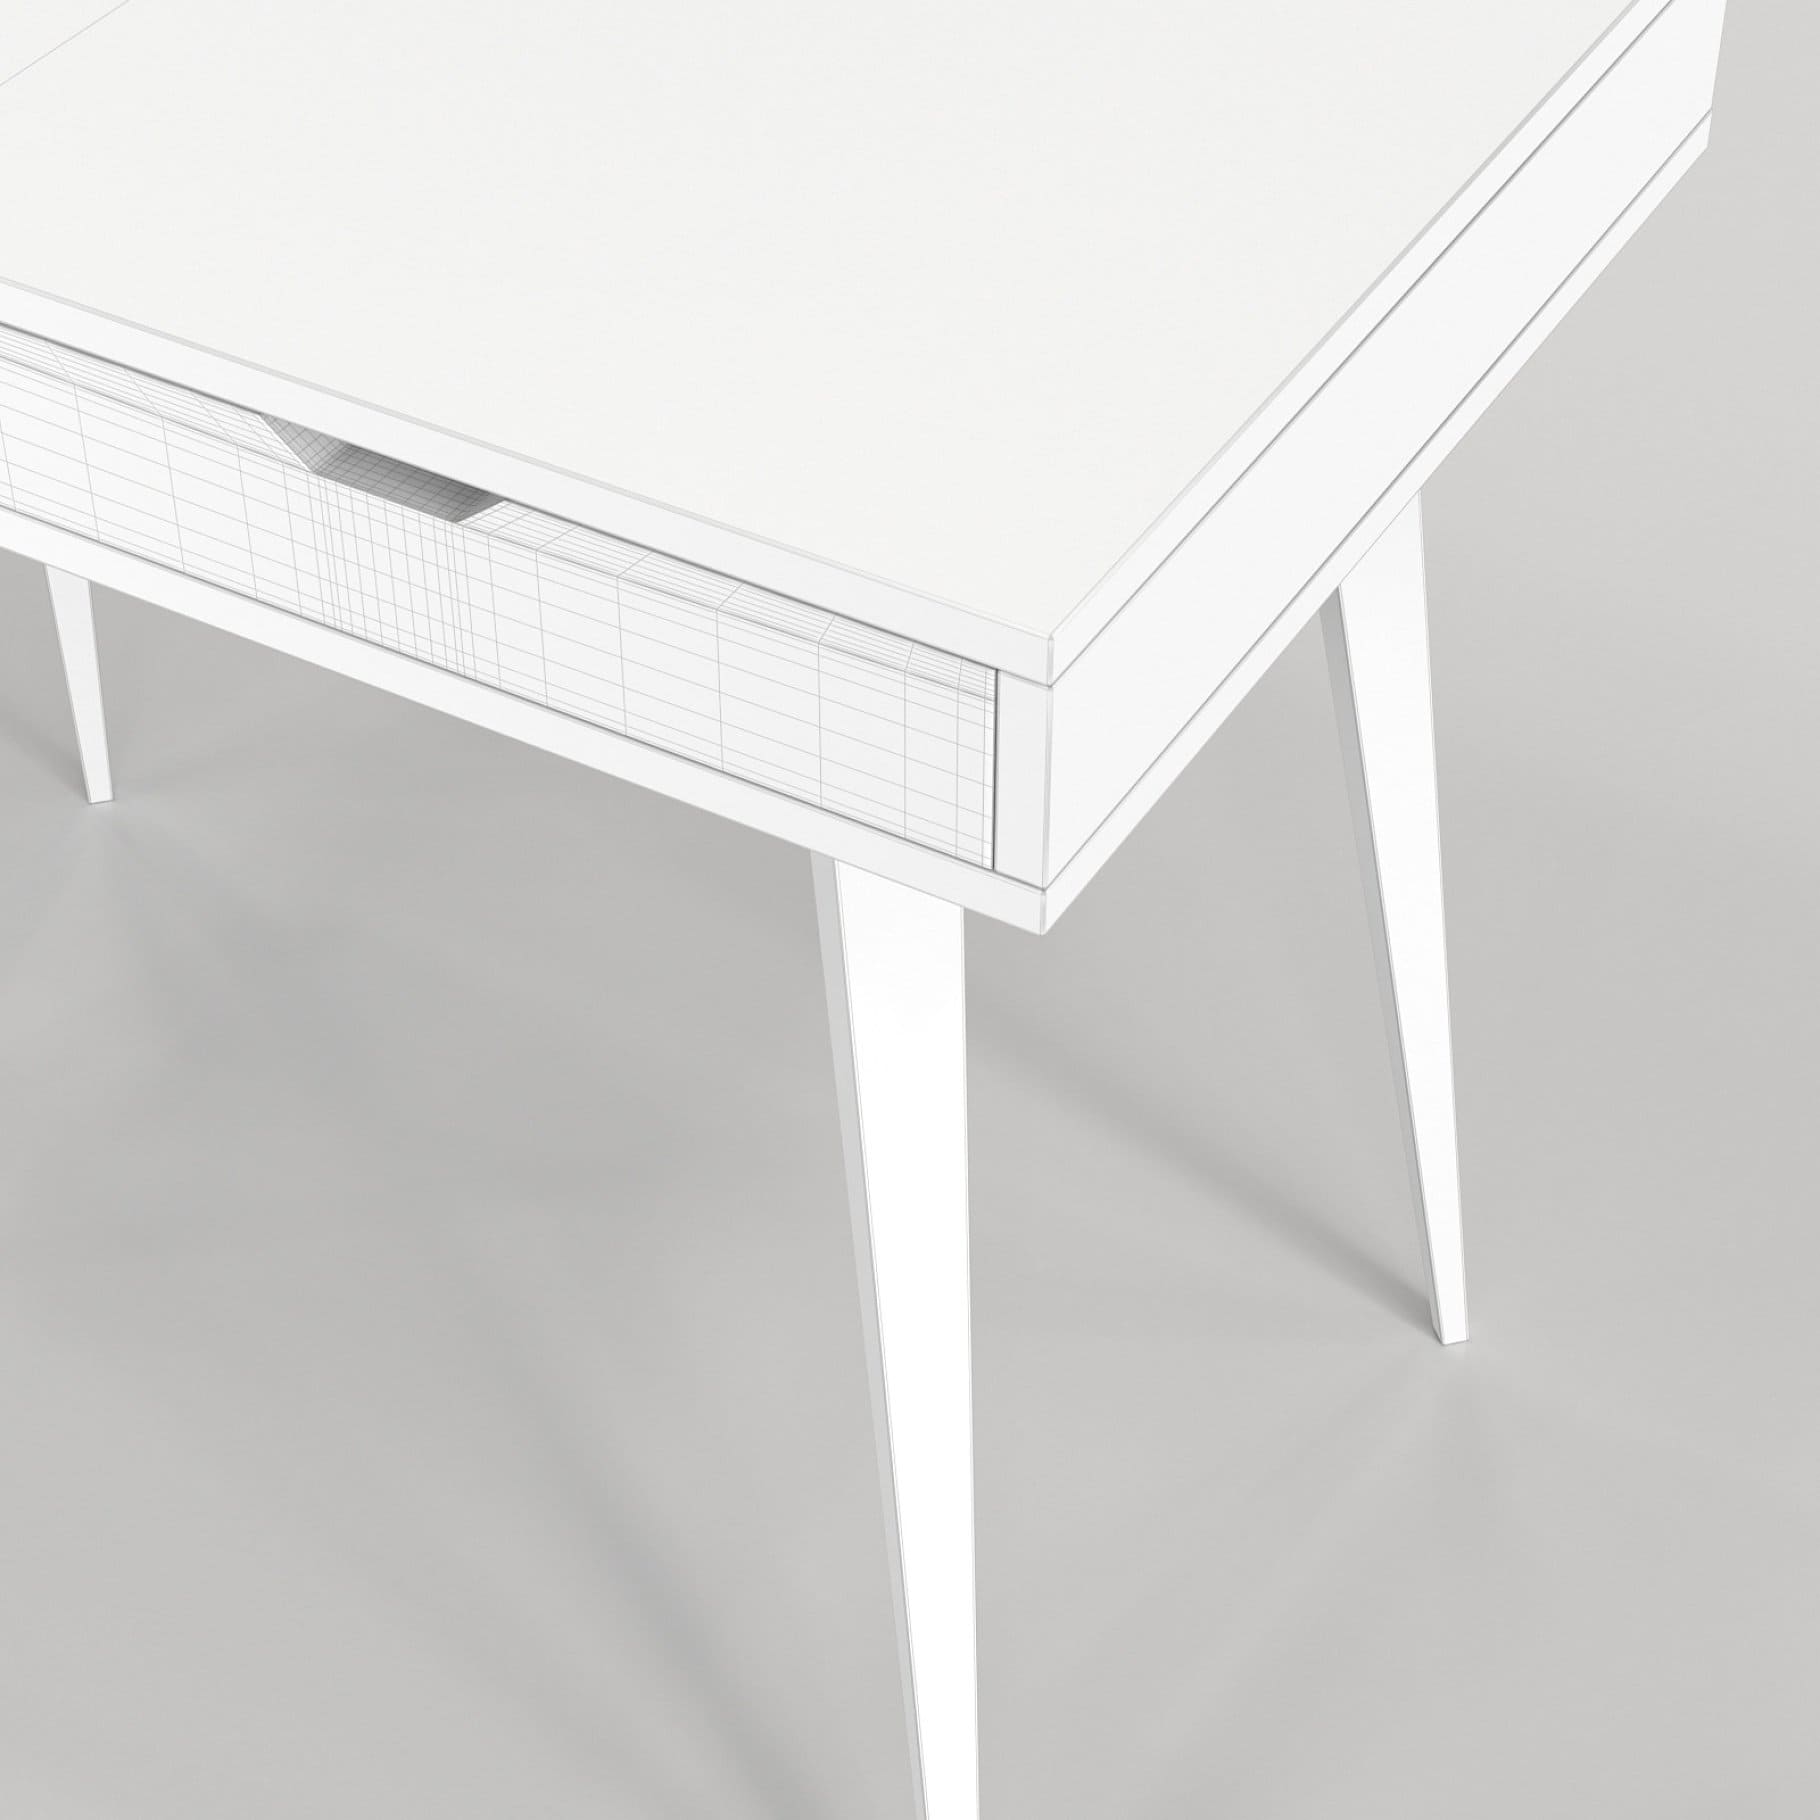 Photo of a corner of a white wooden Scandinavian desk with shelves model 04.